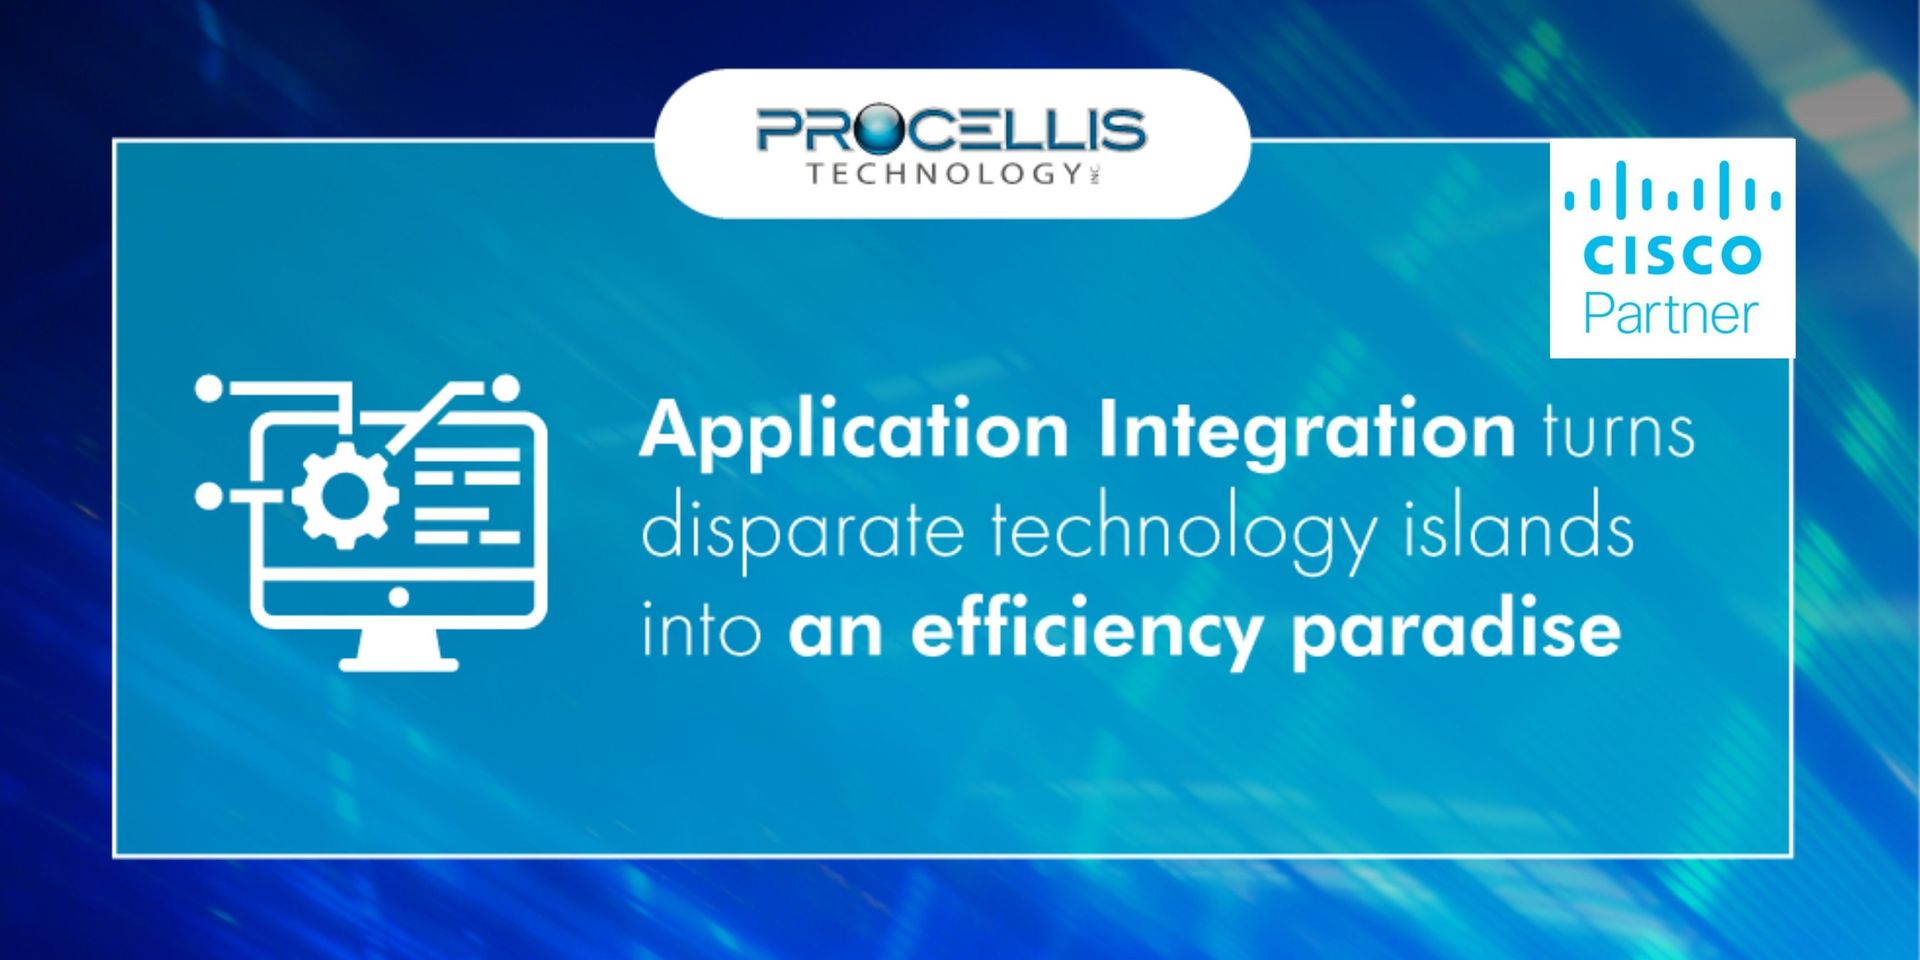 Application Integration Turns Disparate Technologies into a data paradise.